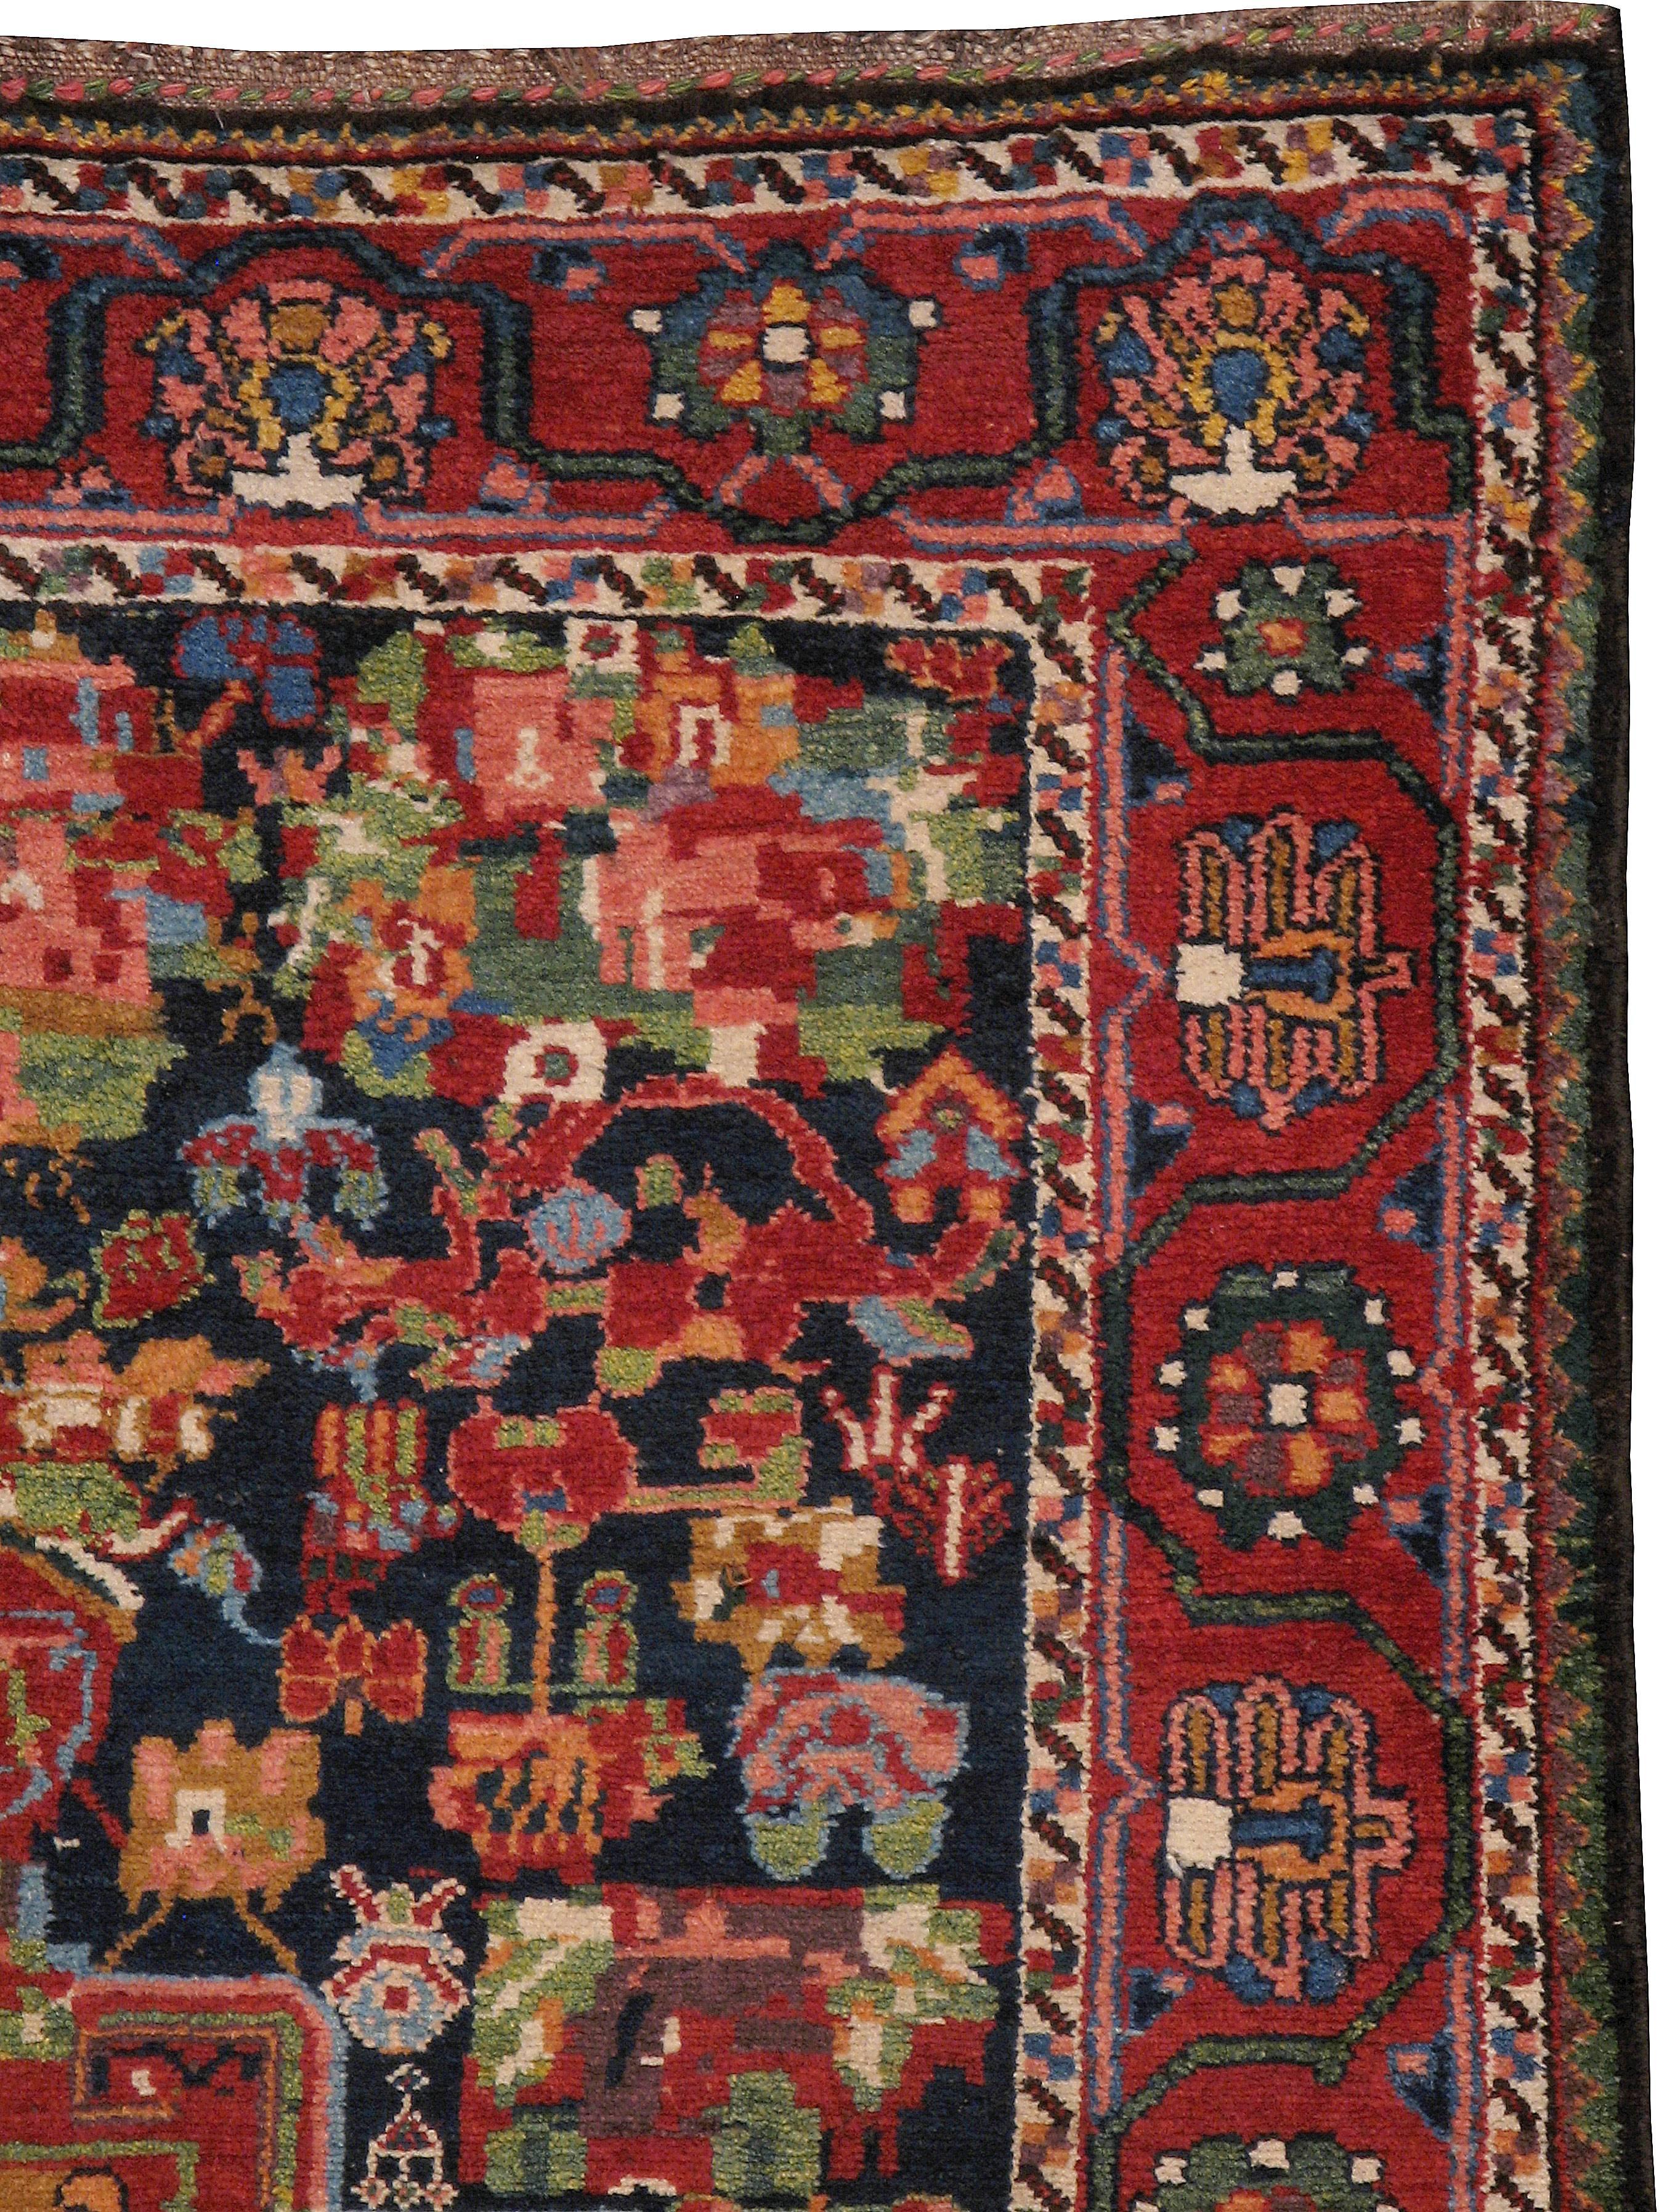 An antique Persian Bakhtiari carpet from the turn of the 20th century.